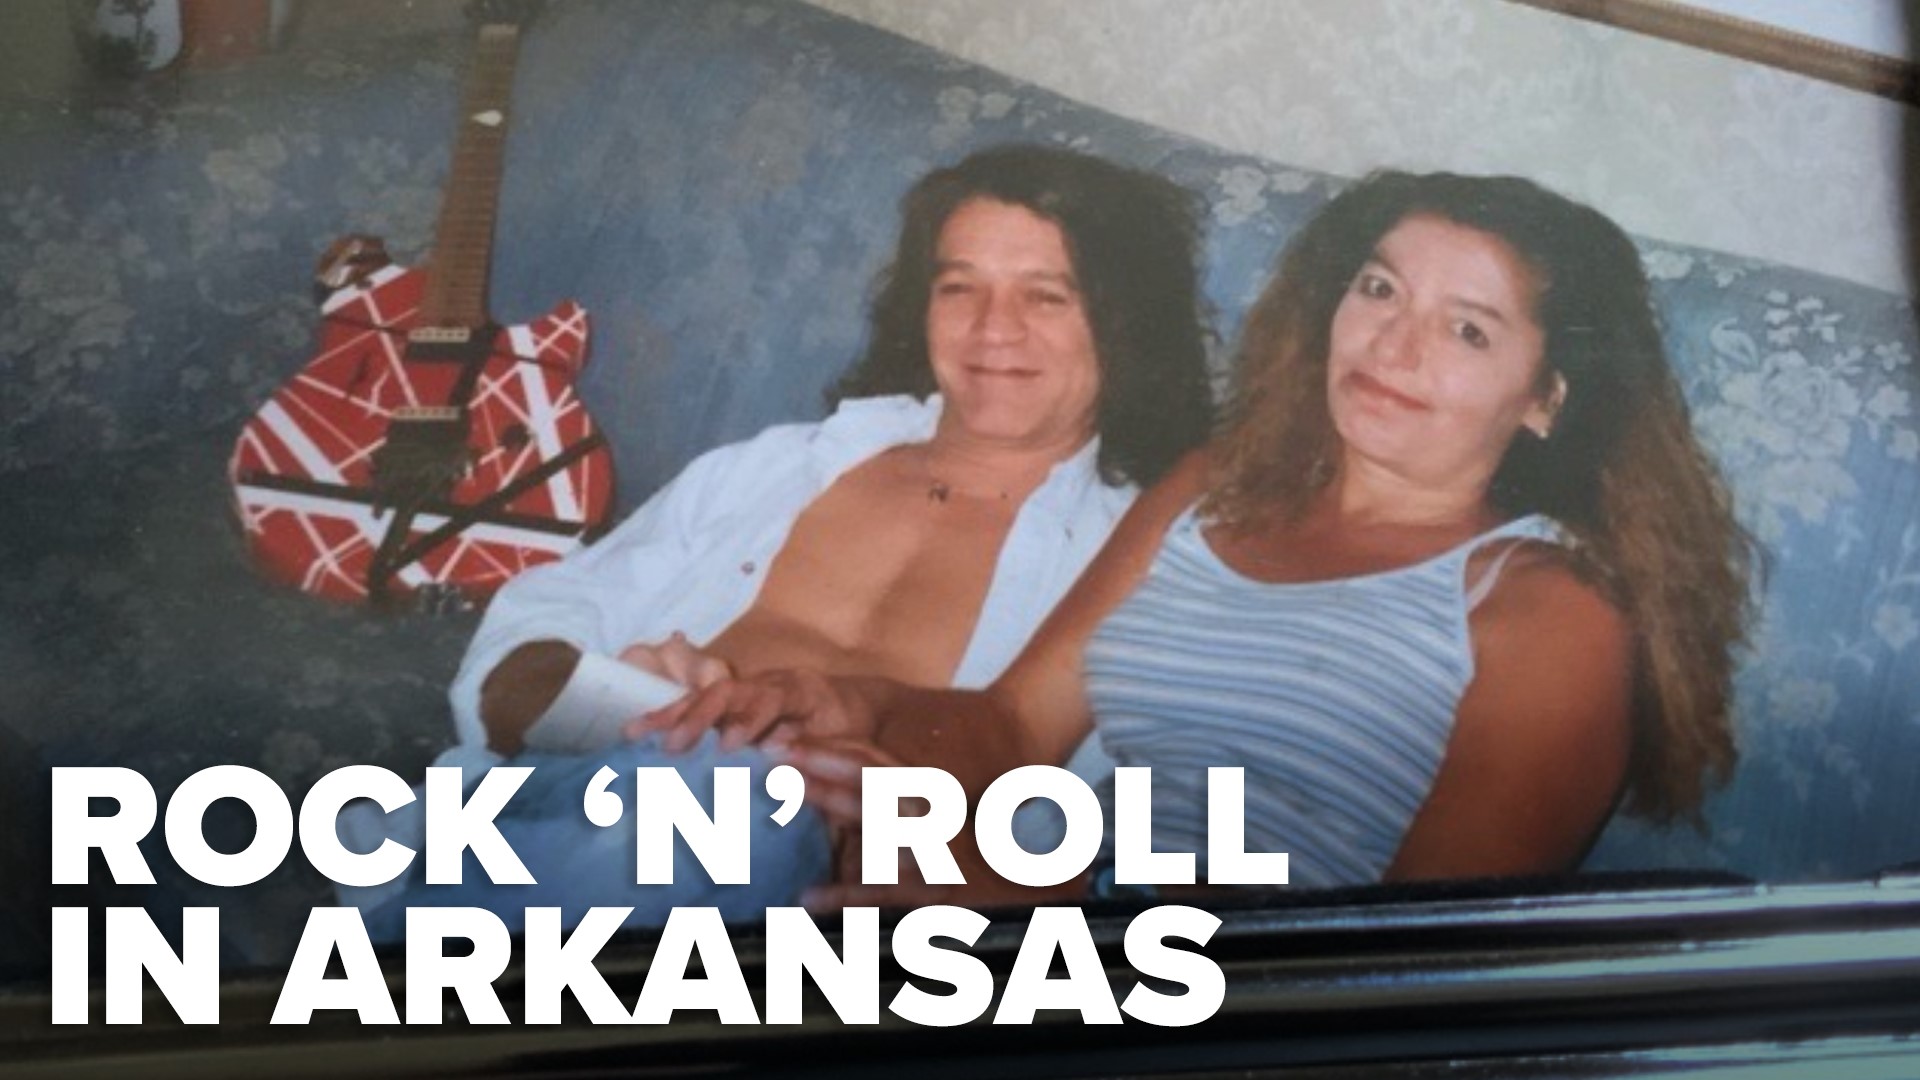 In 2019, Ashley King explored some of the Rock 'n' Roll history in Arkansas, including The Rolling Stones stopping in Fordyce and Sweet, Sweet Connie.